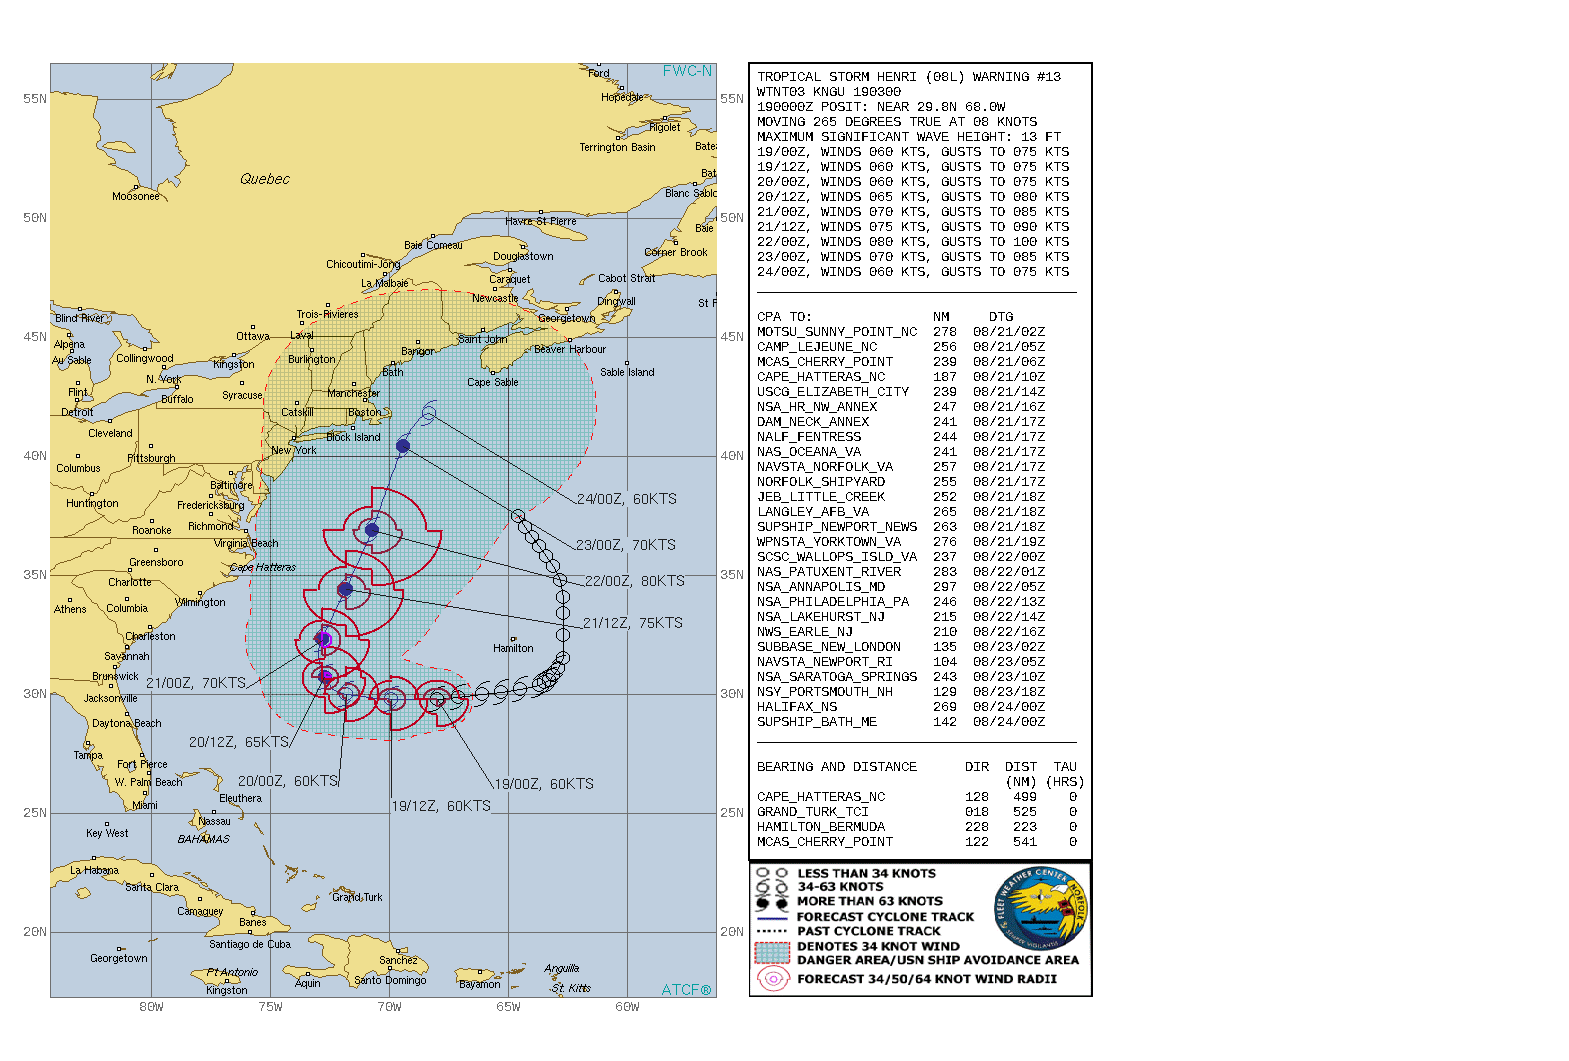 TS 08L(HENRI). WARNING 13 ISSUED AT 19/03UTC. CURRENT INTENSITY IS 60KNOTS AND IS FORECAST TO PEAK AT 80KNOTS/CAT 1 BY 22/00UTC.